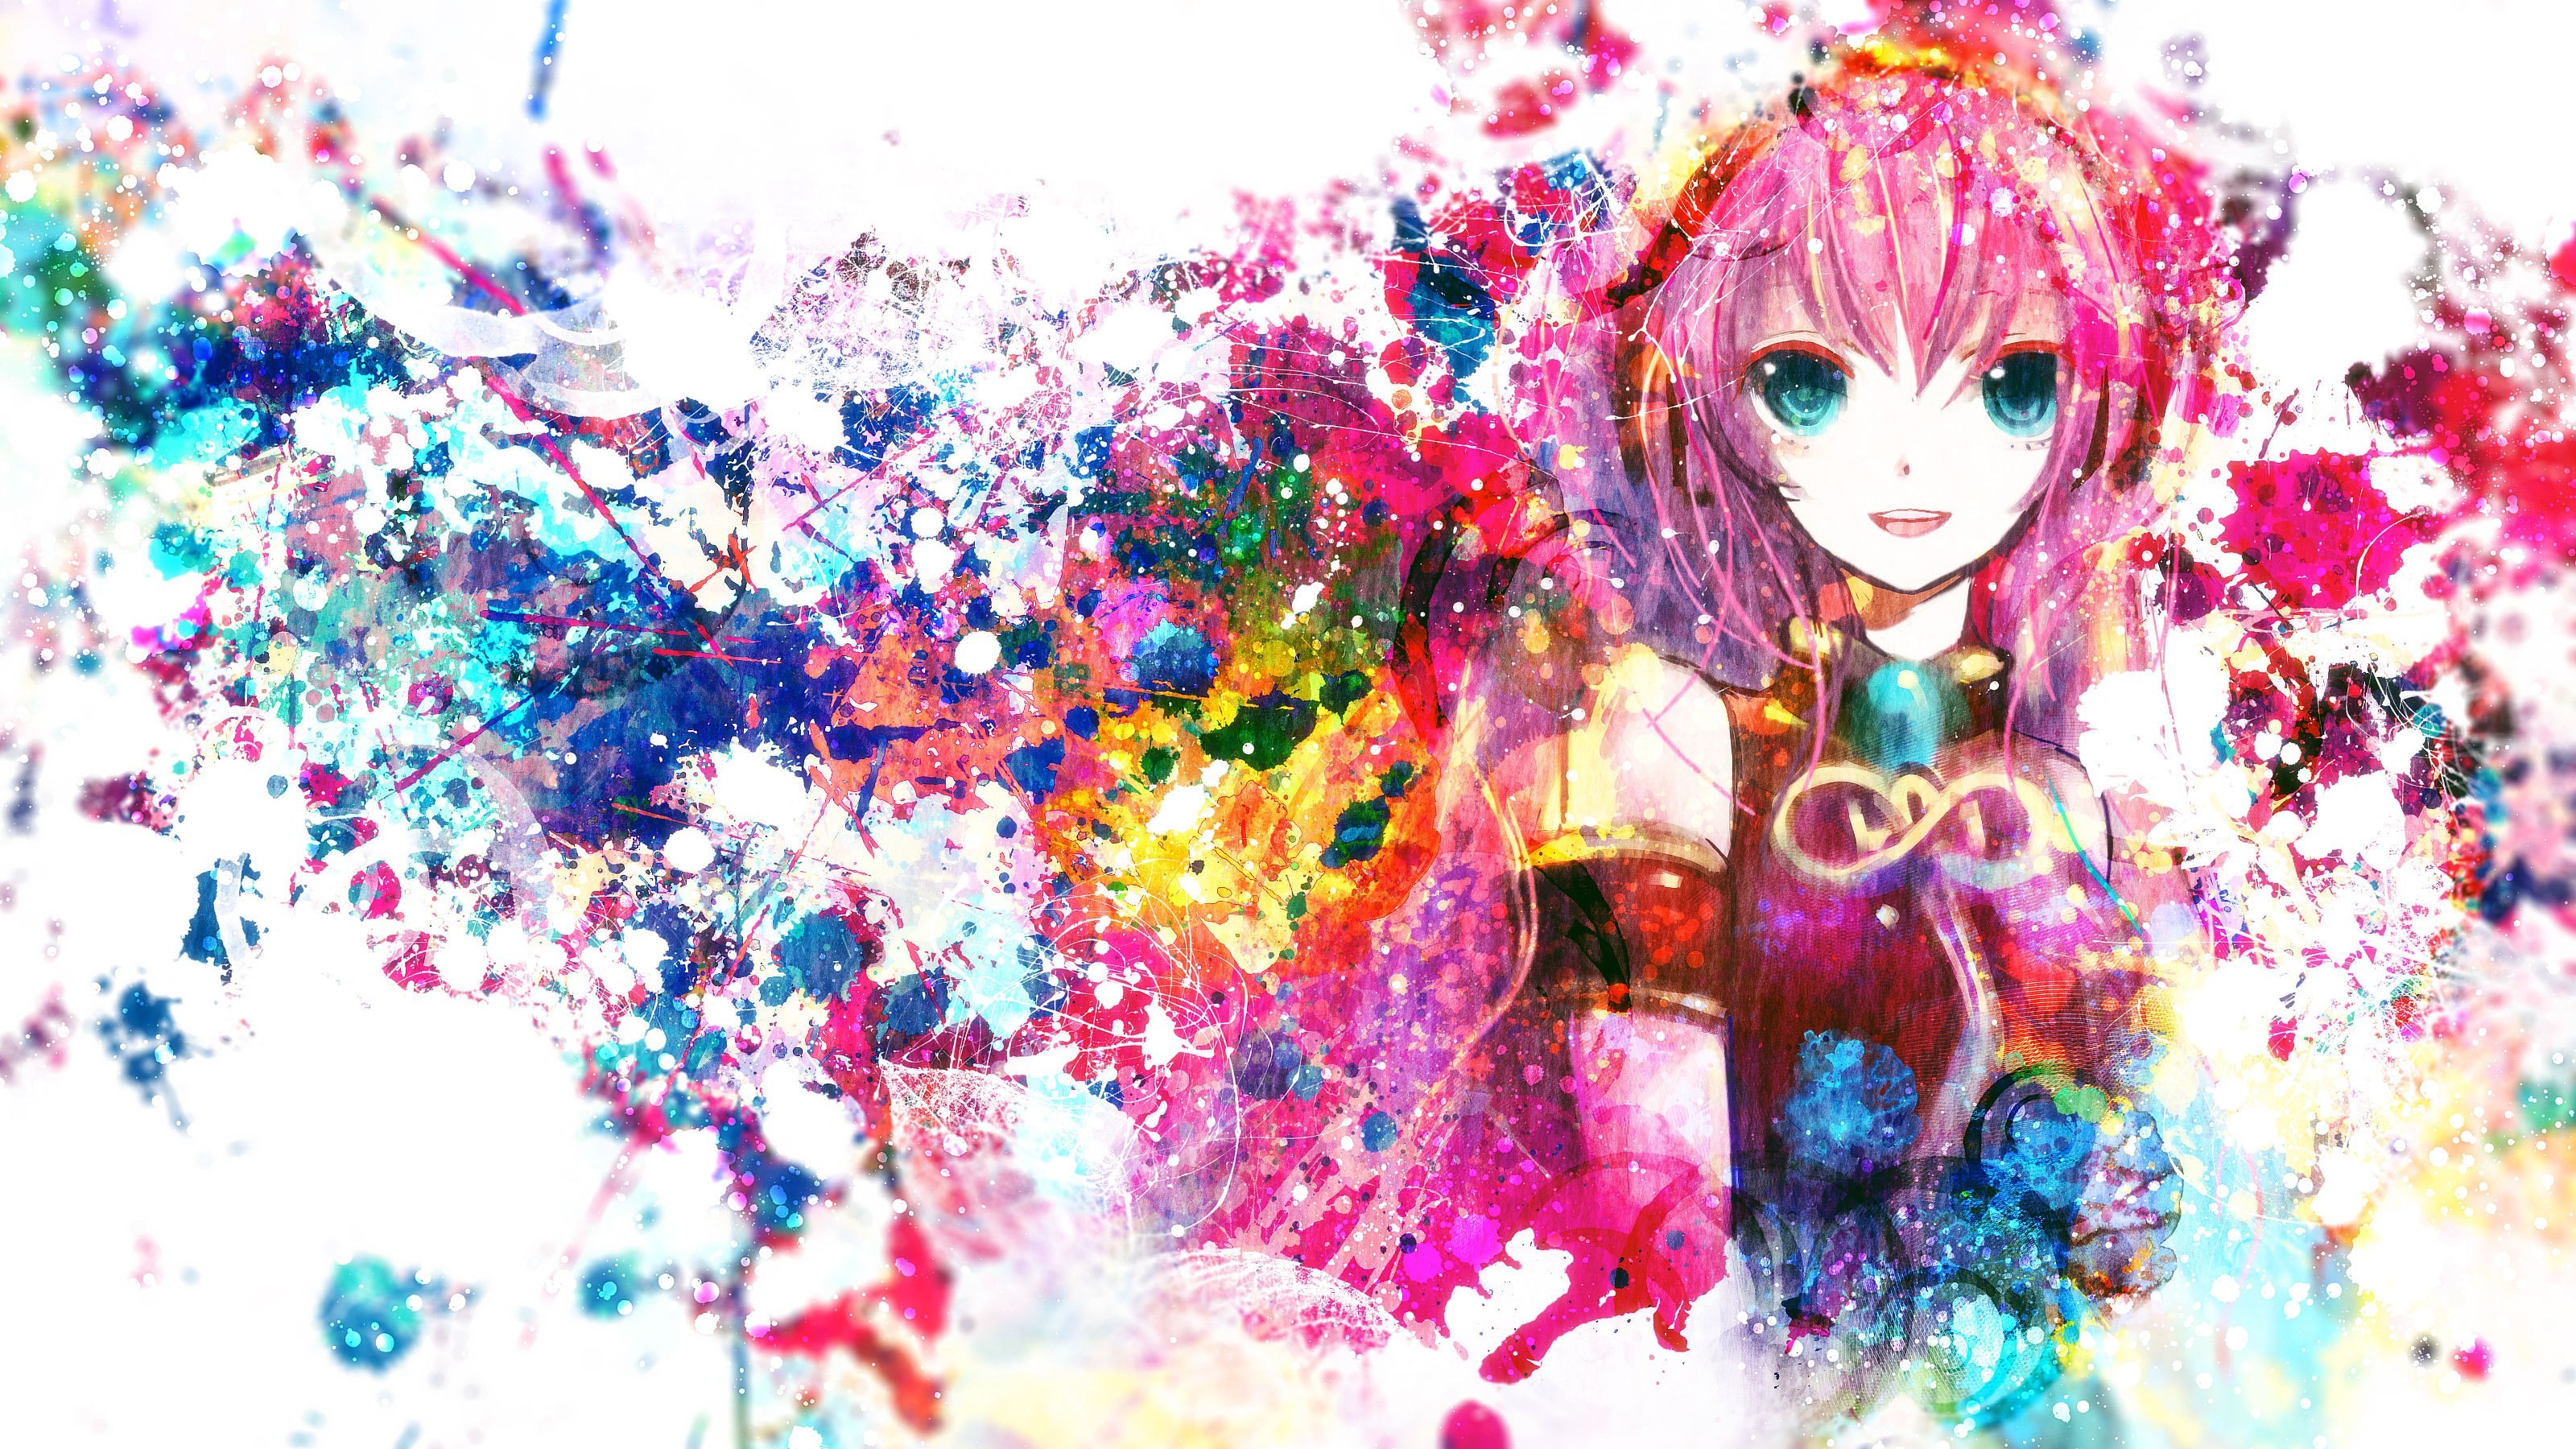 3200x1800 vocaloid picture: Wallpapers Collection - vocaloid category